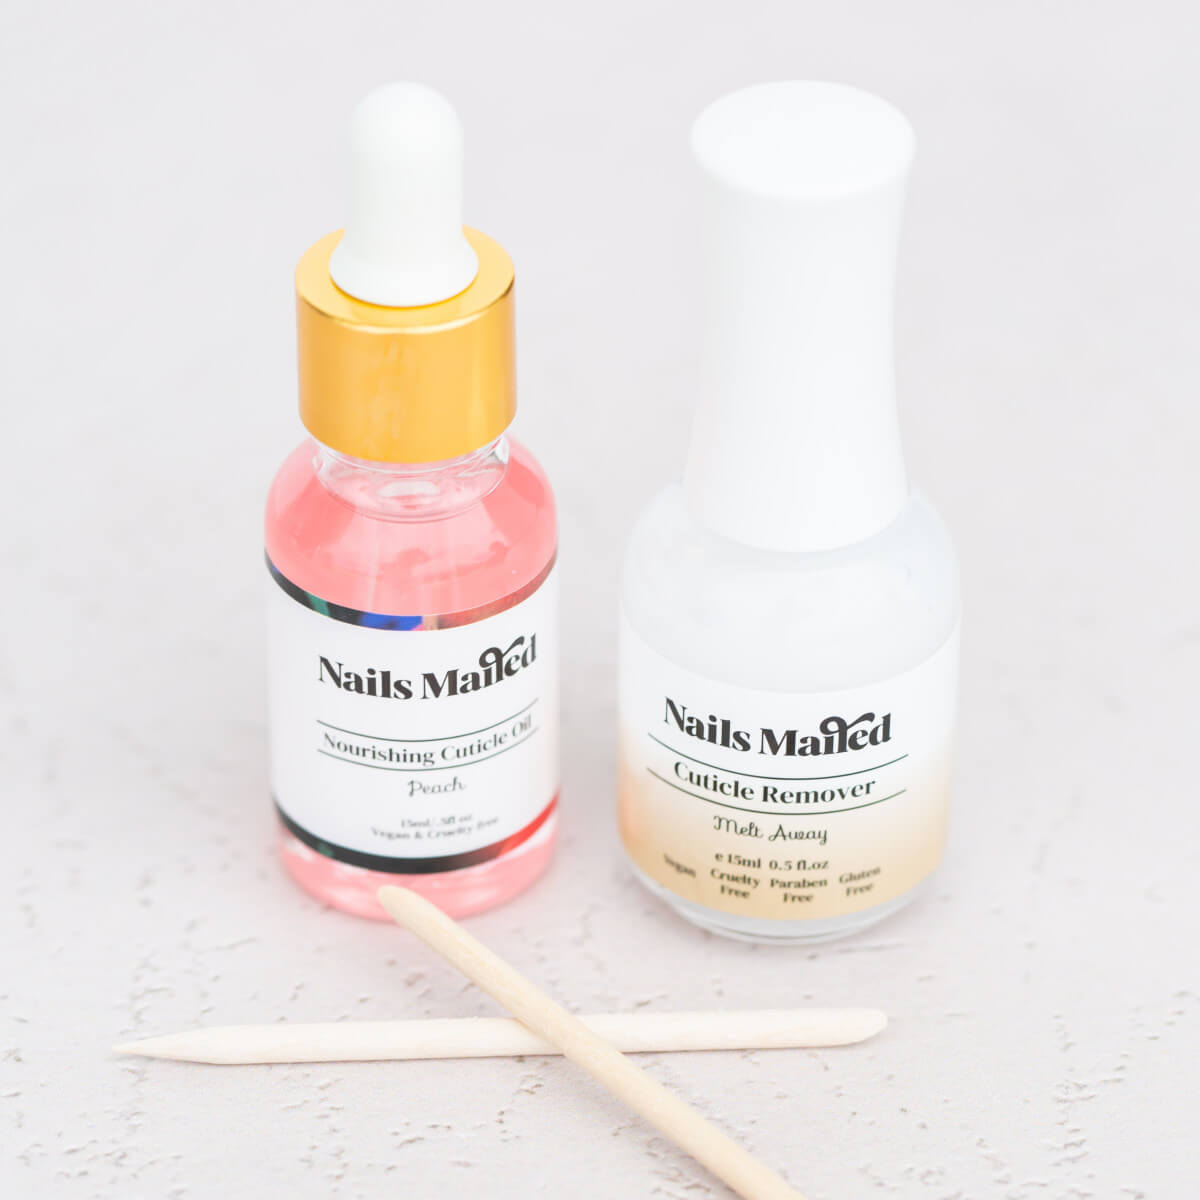 Cuticle remover is most effective when followed up with jojoba oil cuticle oils